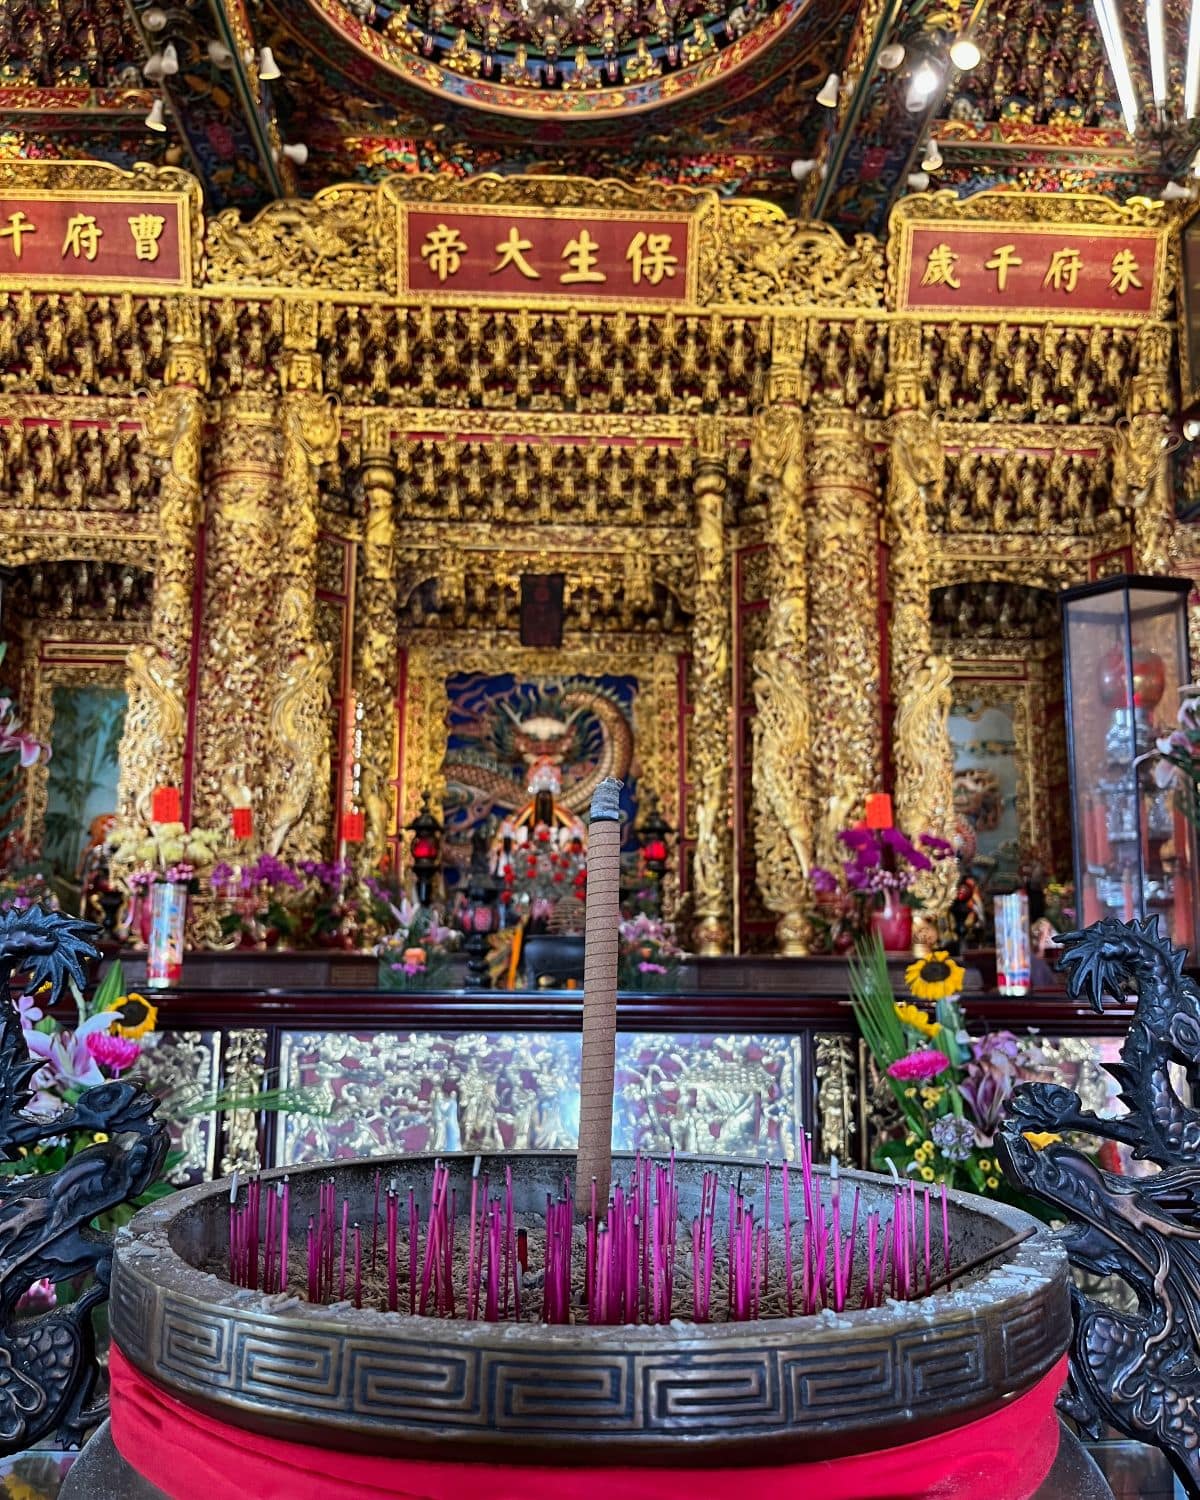 Inside one of the beautiful shrines we visited. (Photo: Alix Craft)